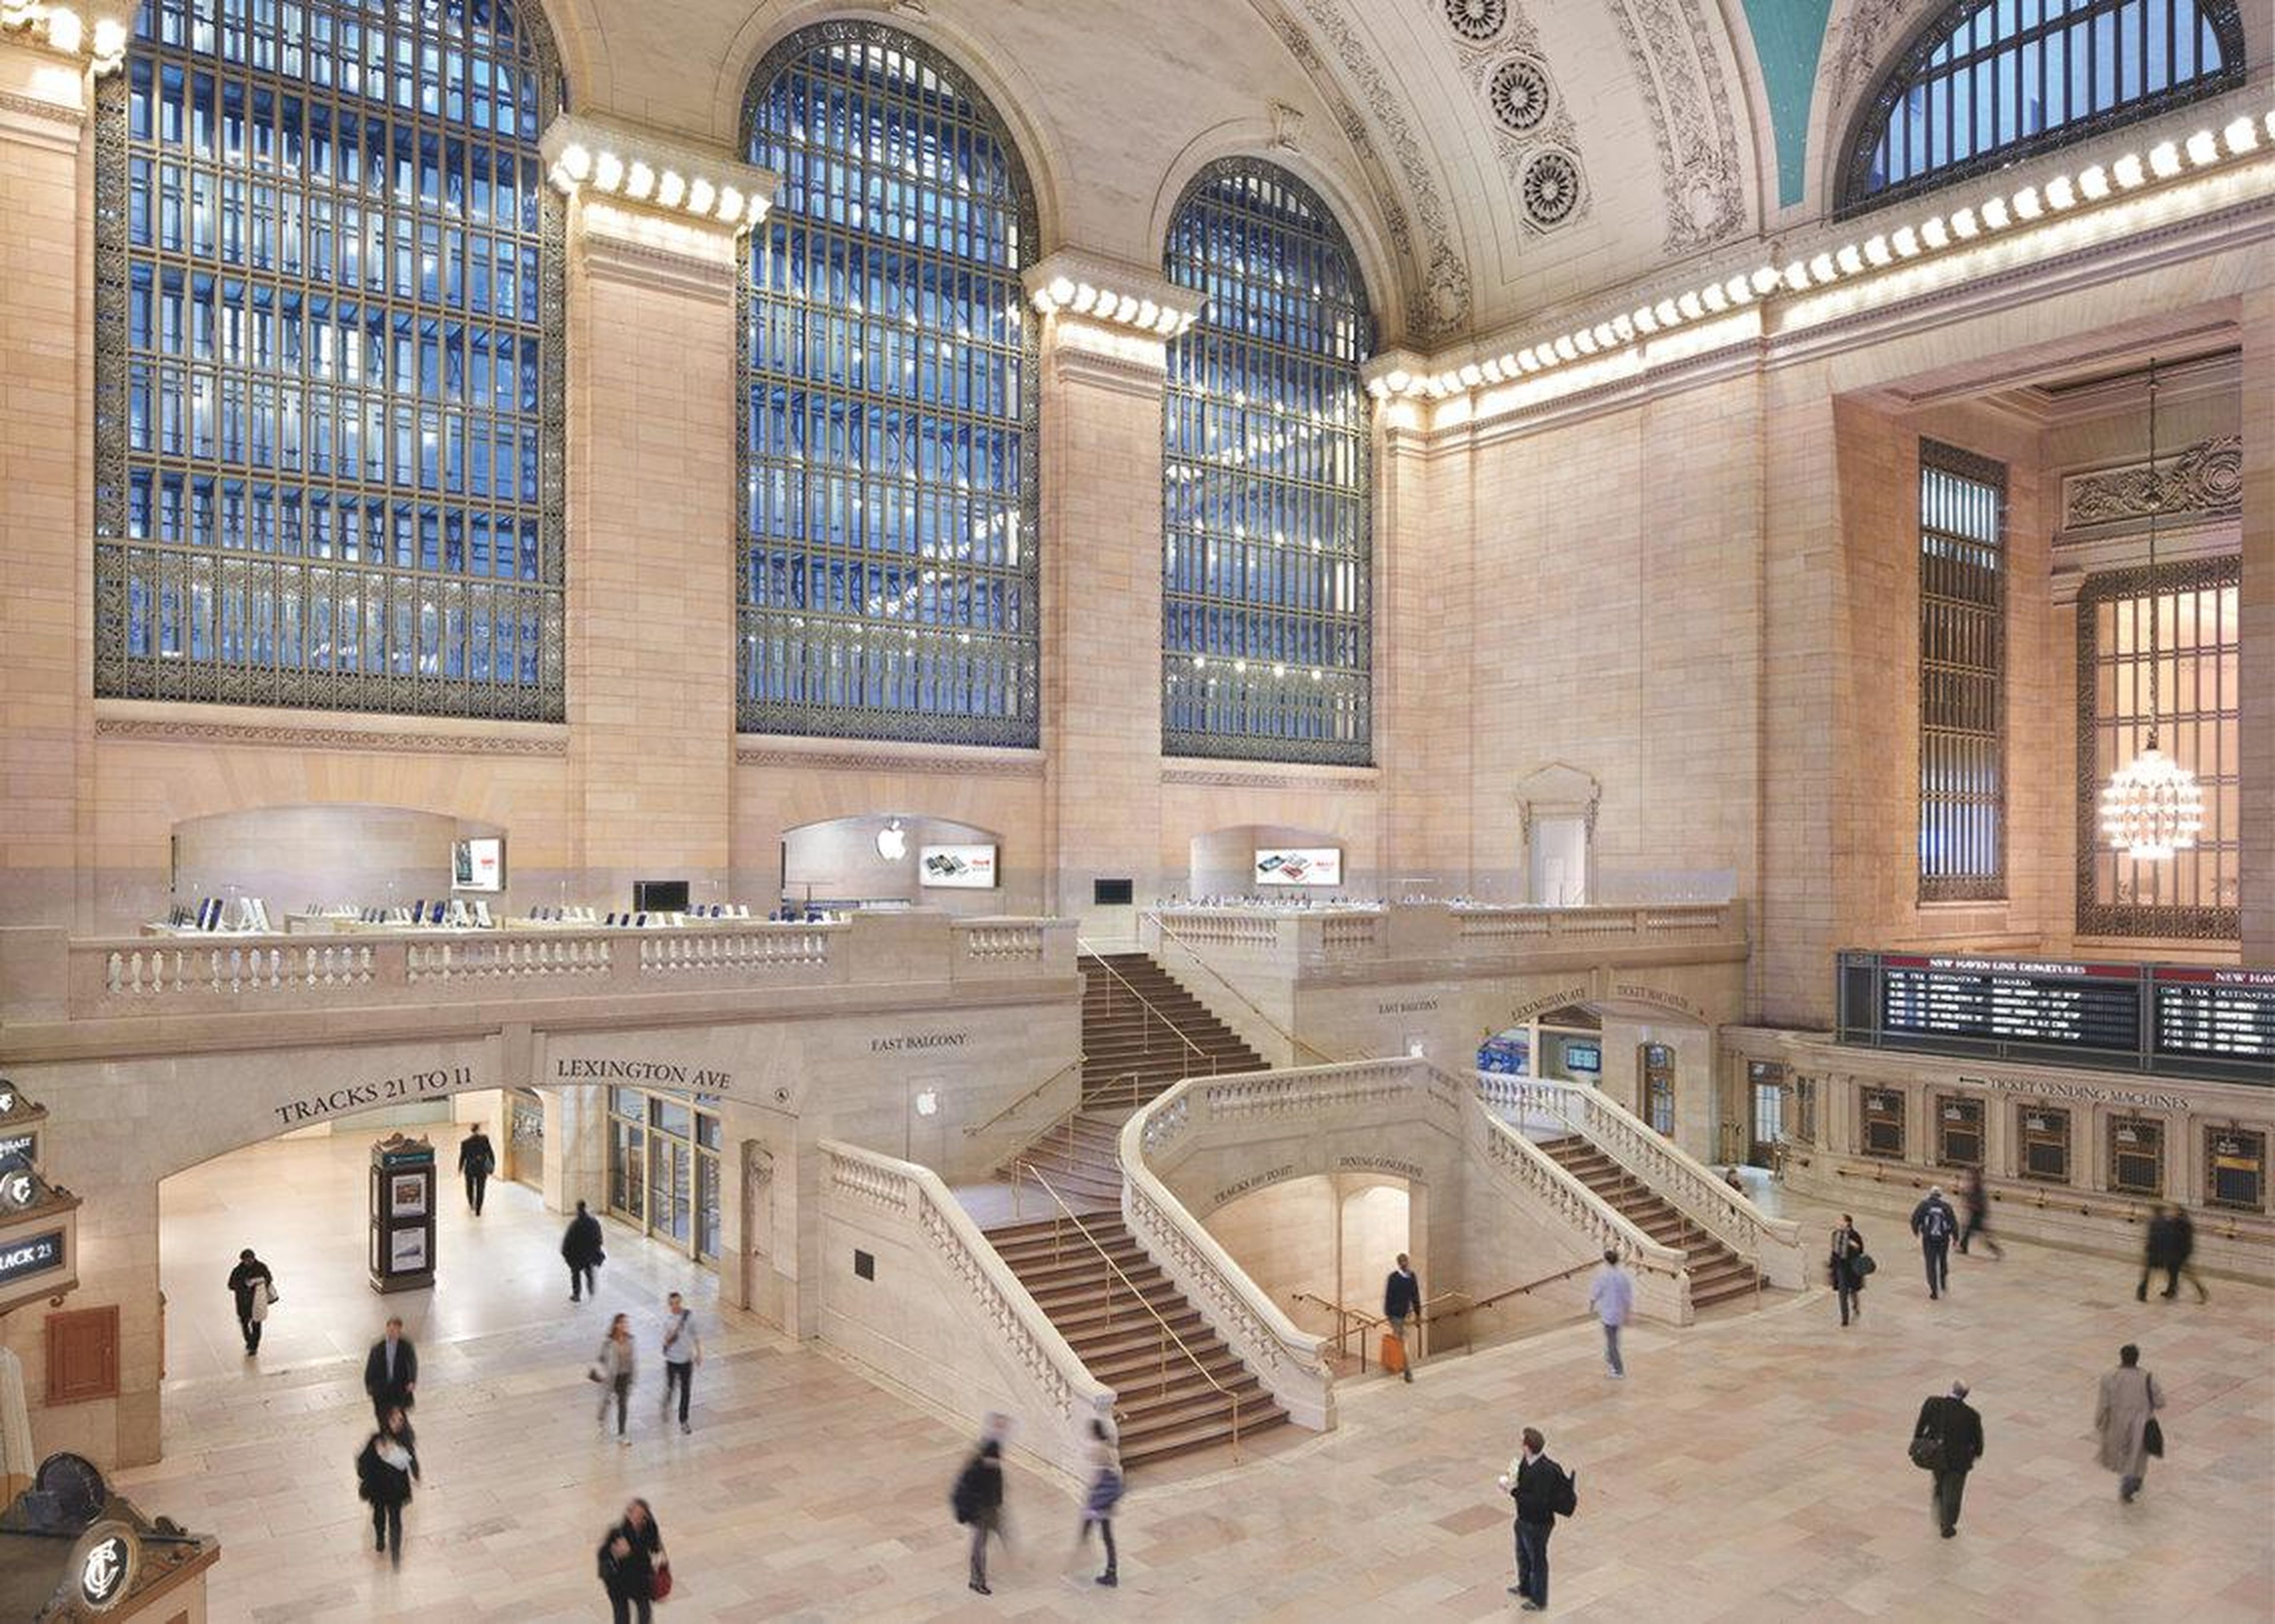 Apple reportedly paid $2.5 million to renovate space in New York's iconic Grand Central Terminal. That is on top of the $5 million it reportedly paid to buy out the previous tenant.